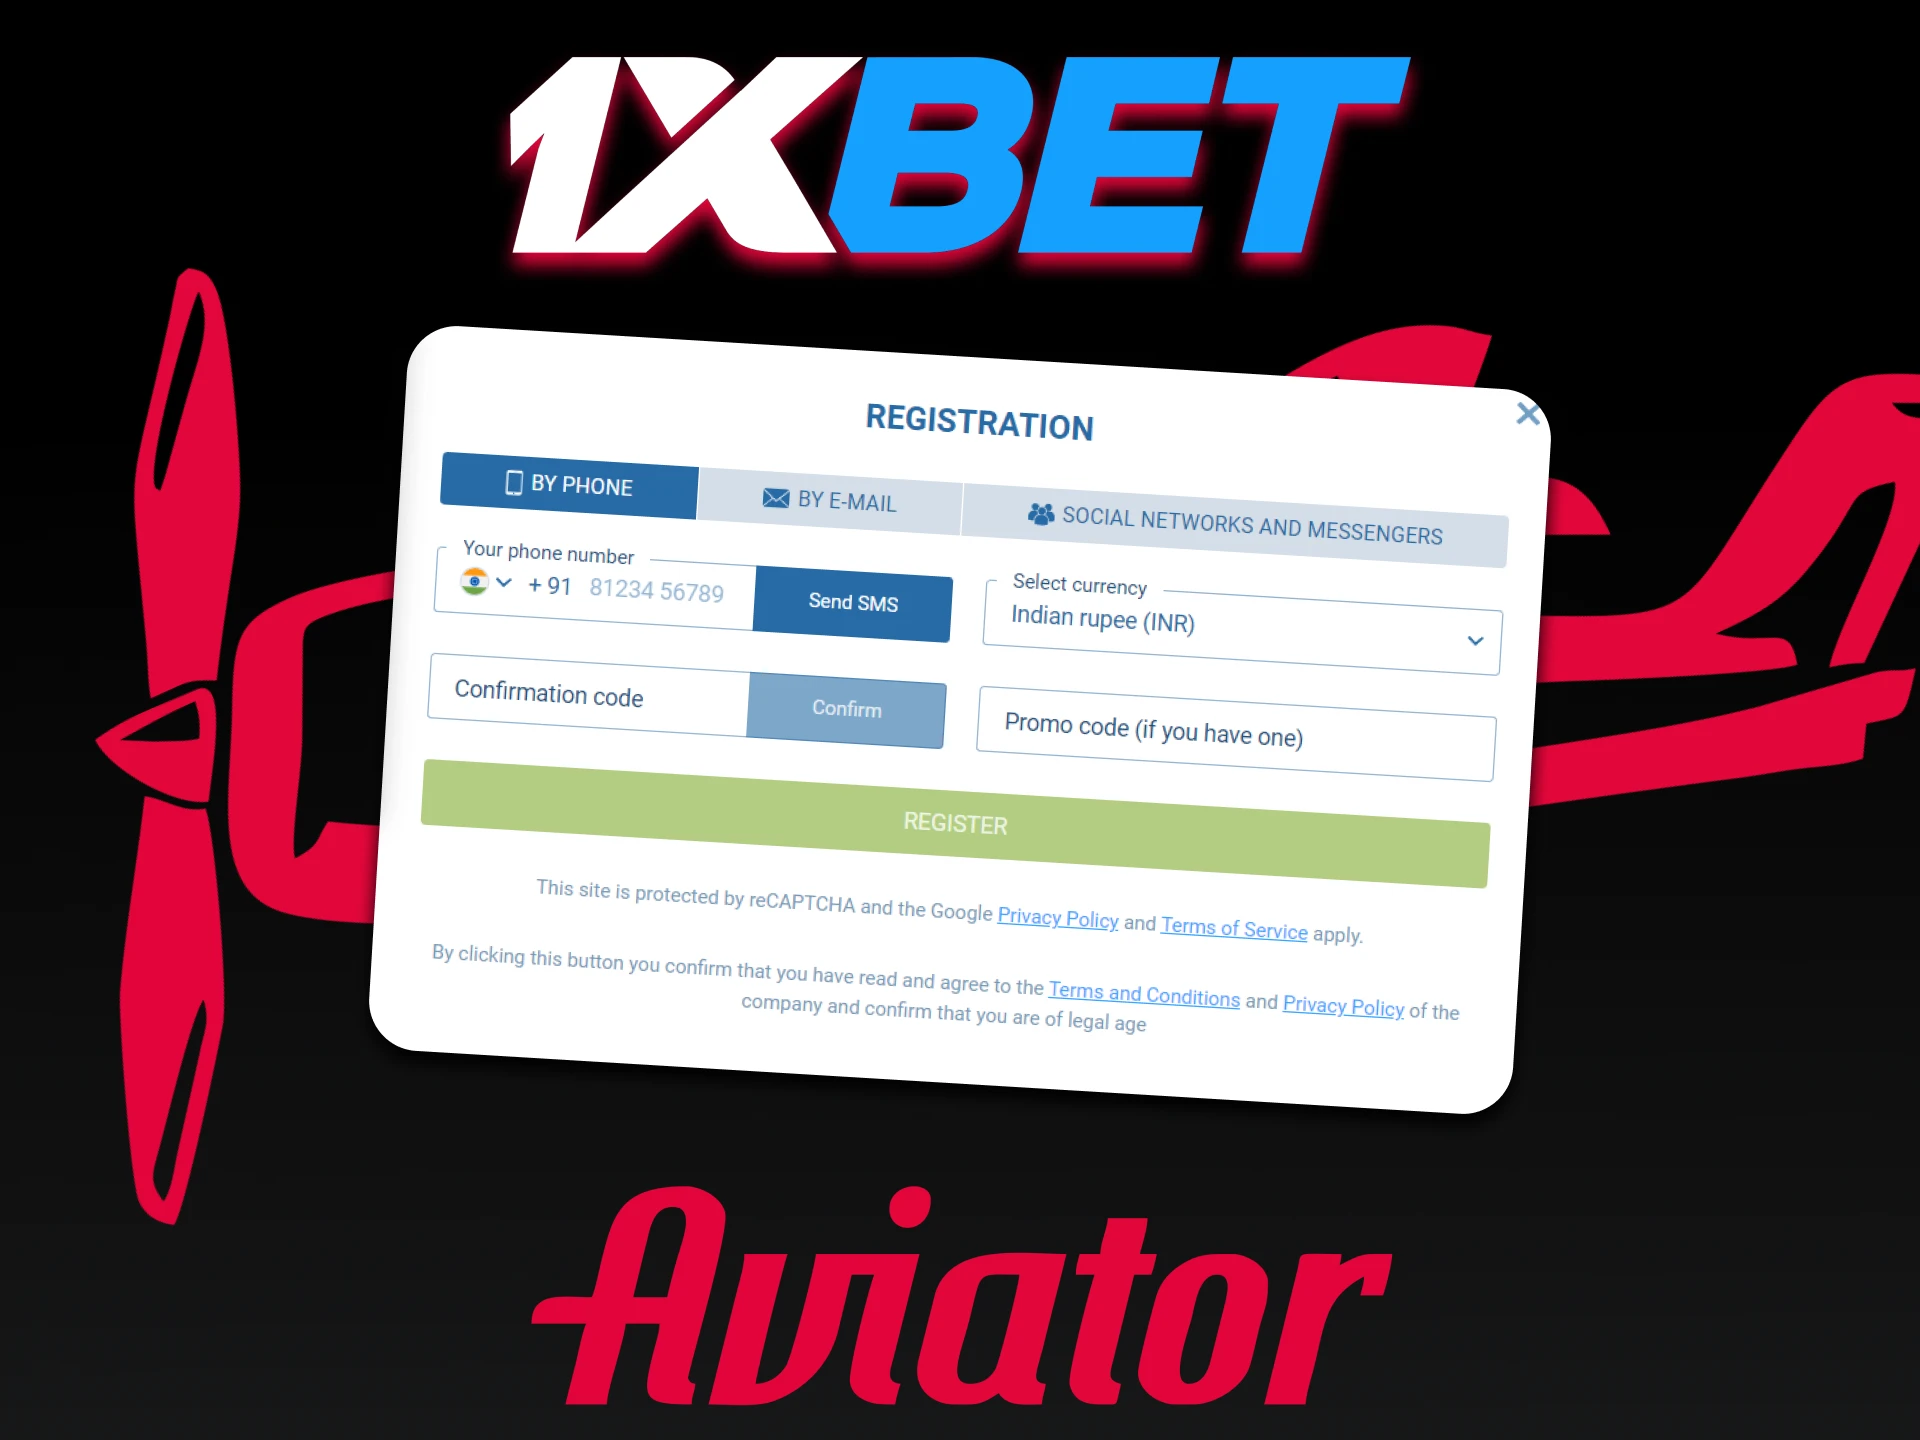 Go through the registration process on 1xbet to play Aviator.